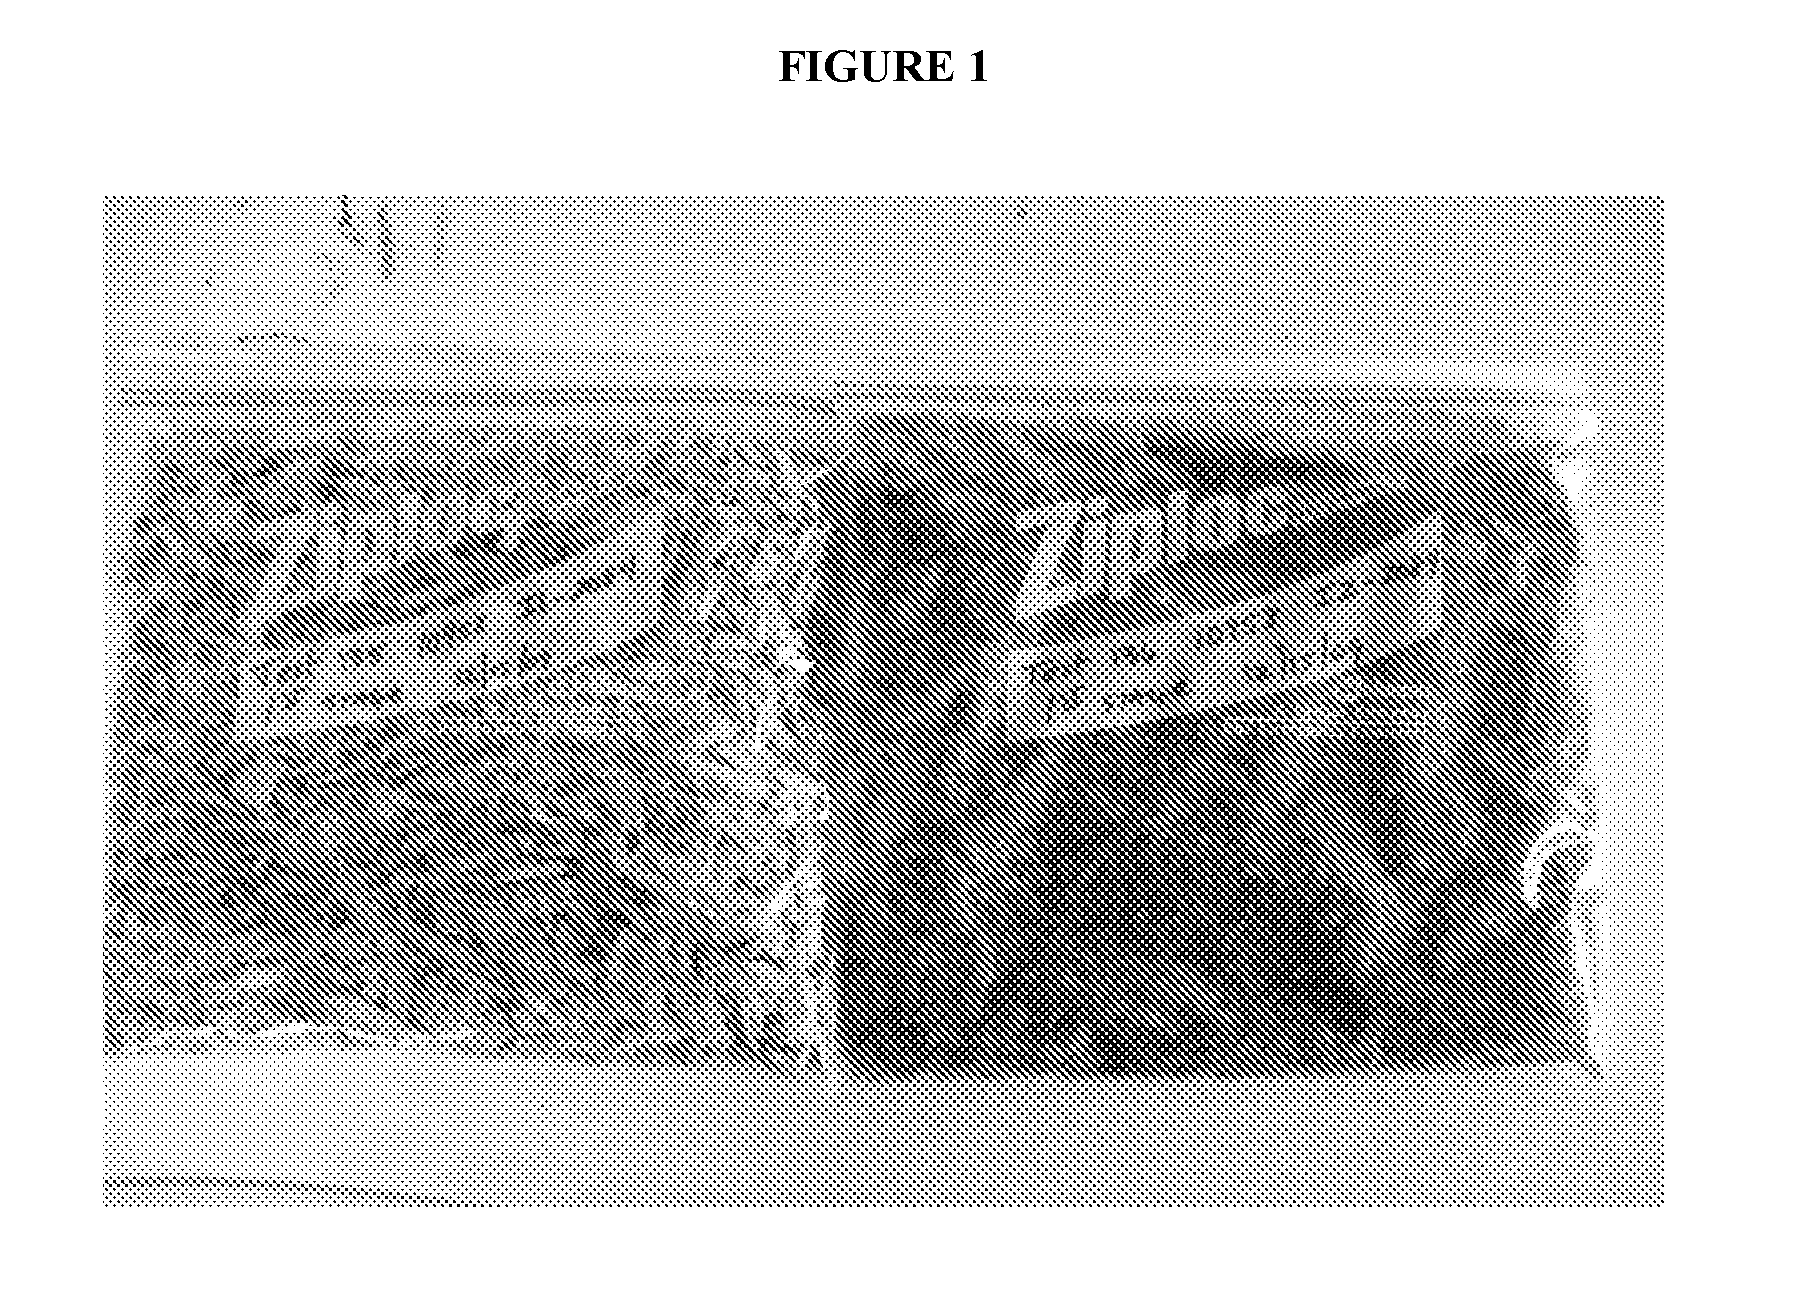 Method for extracting soluble sugar molecules from biomass material